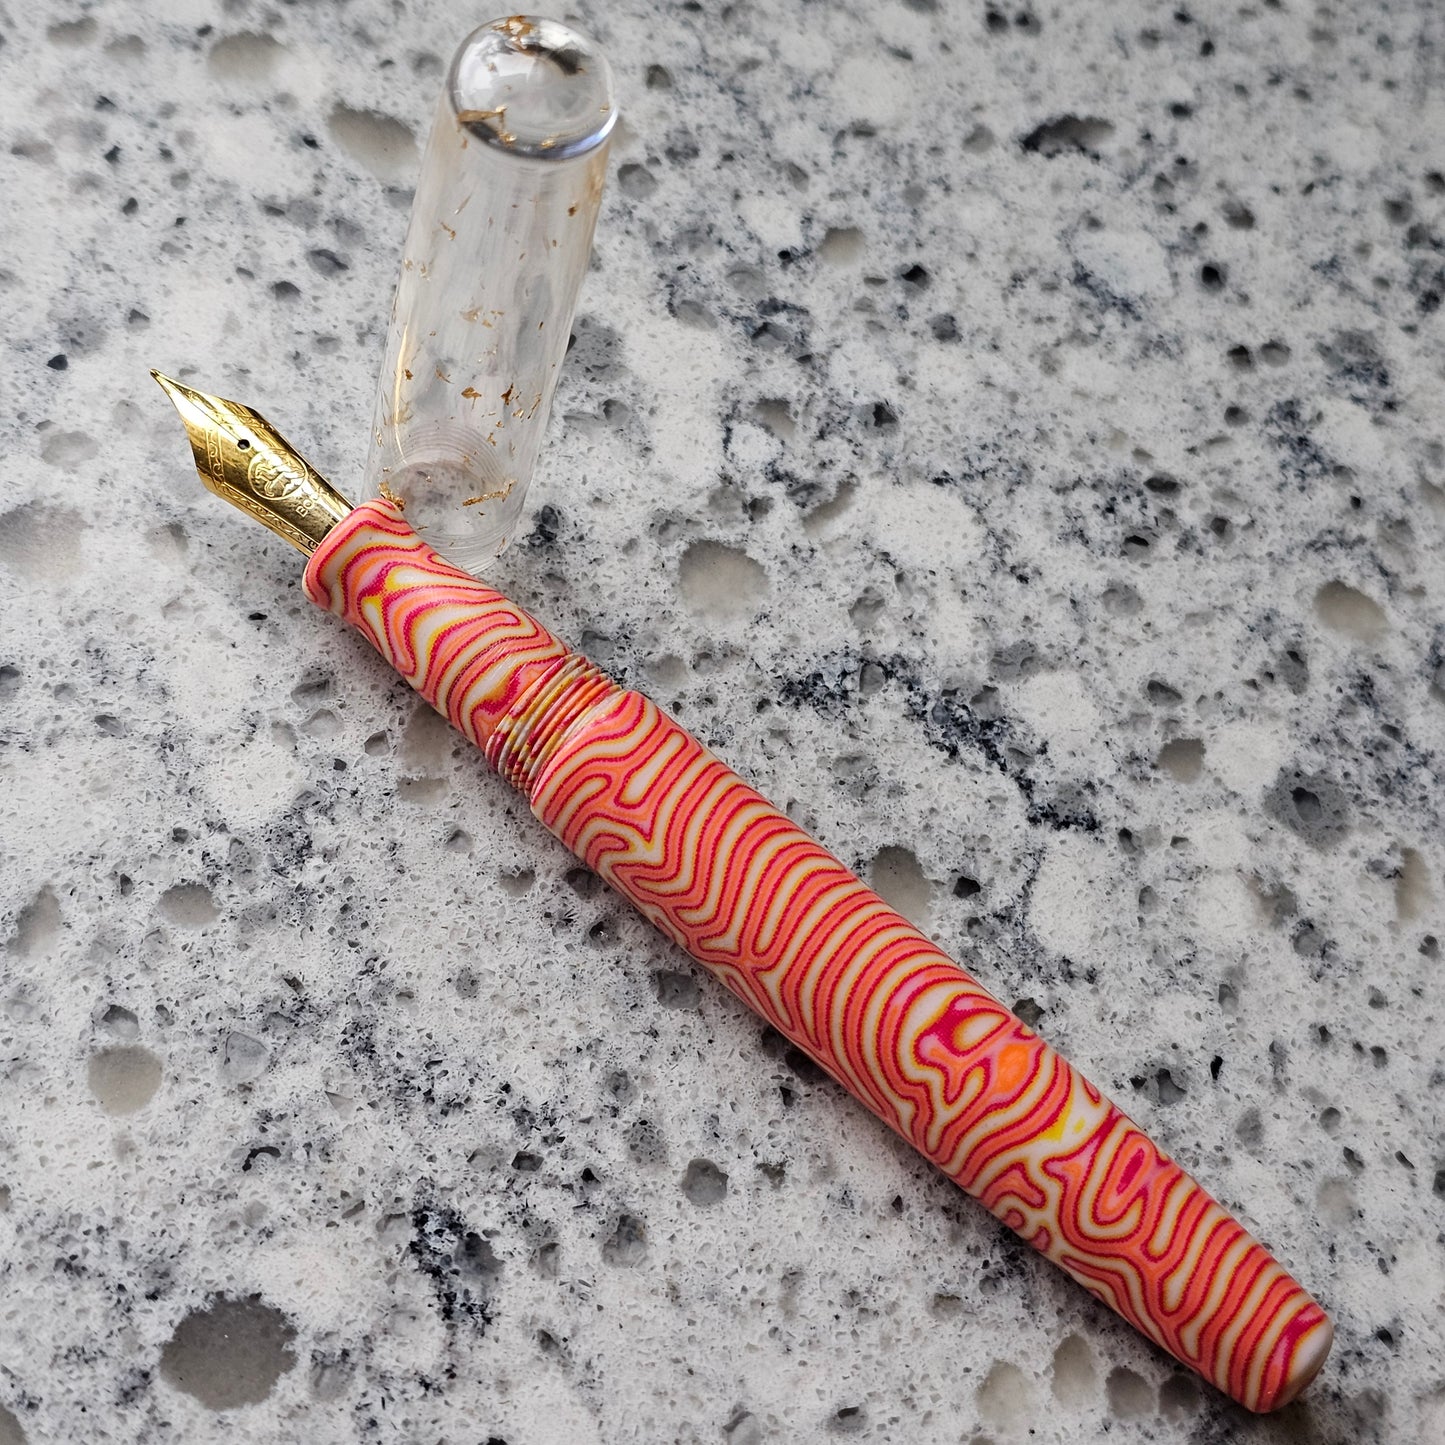 Crazy Fiber Fountain with Gold Flake Demonstrator Cap